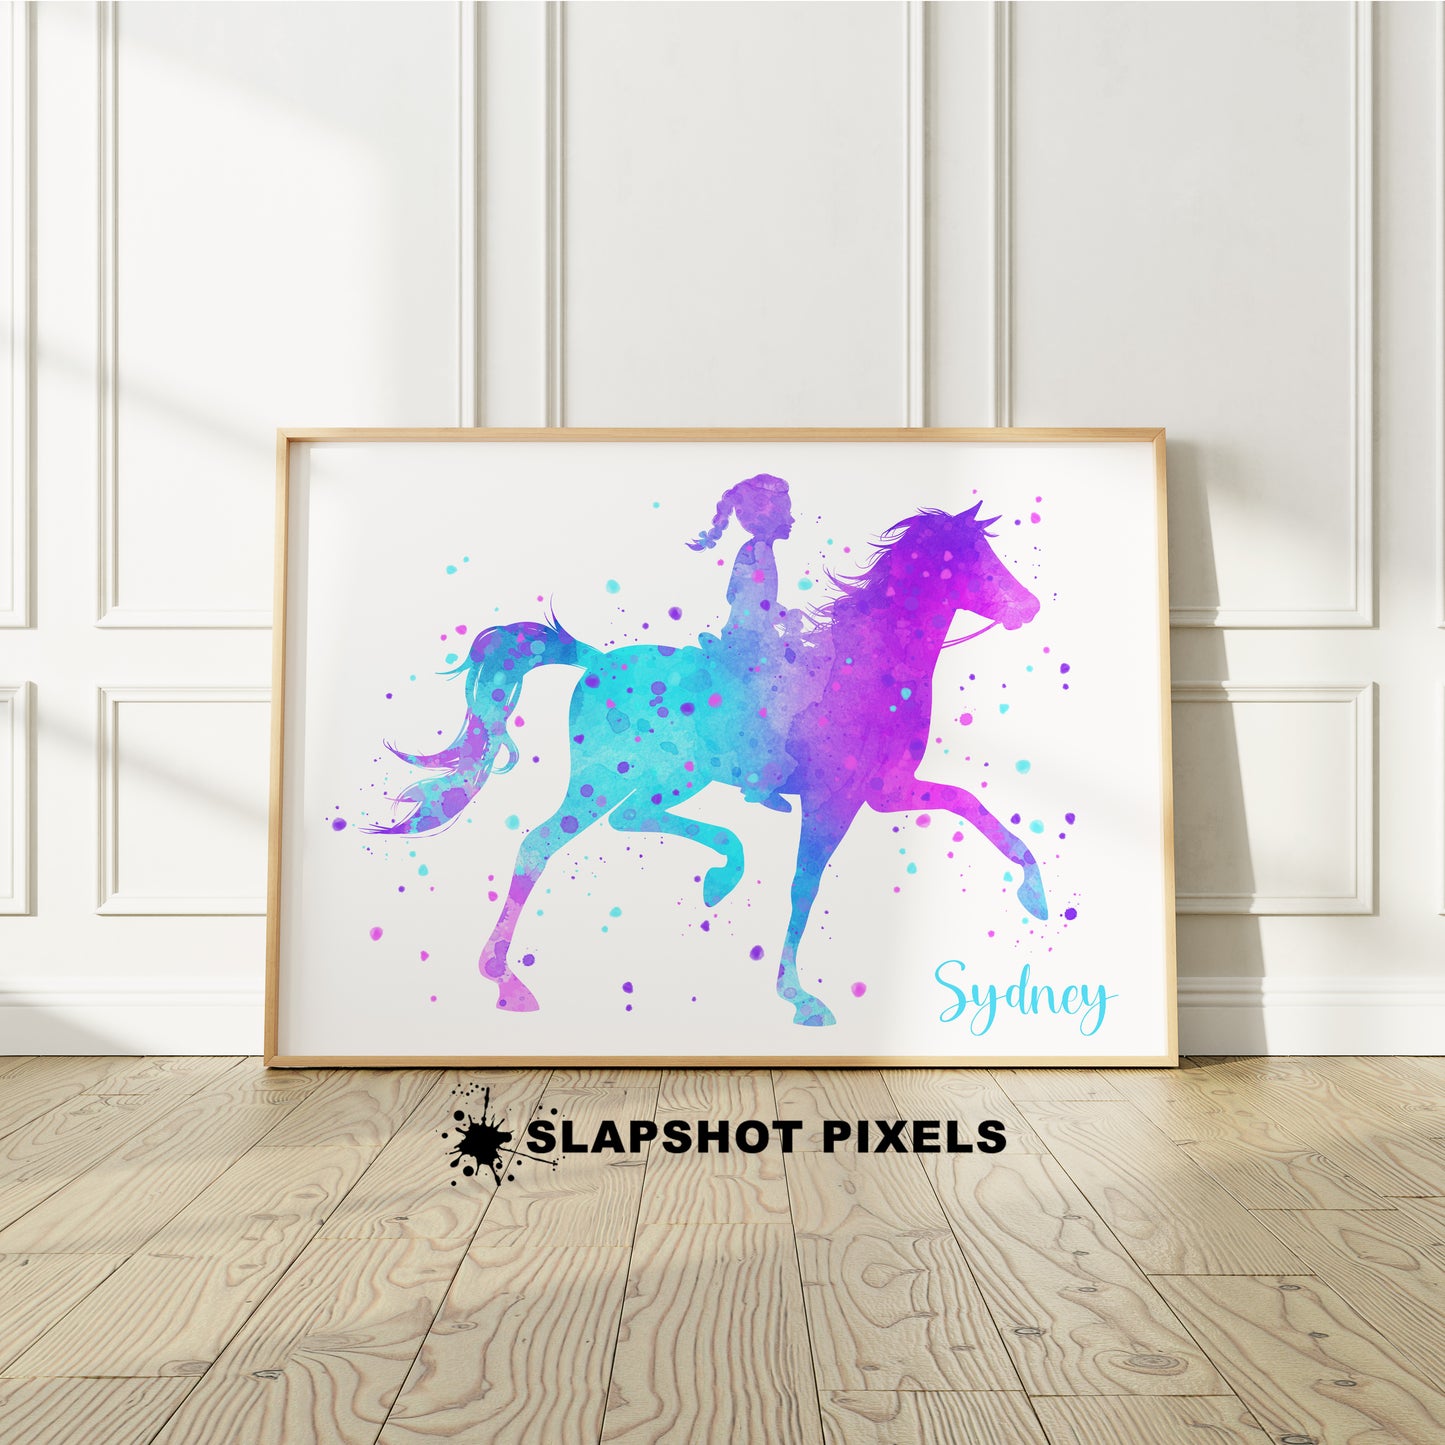 Personalized horseback riding poster showing a girl riding a horse with a custom name. Designed in pink, purple and teal watercolor splatters. Perfect horseback riding gifts for girls, horse prints, horseback riding wall art décor in a girls bedroom and birthday gifts for girls.